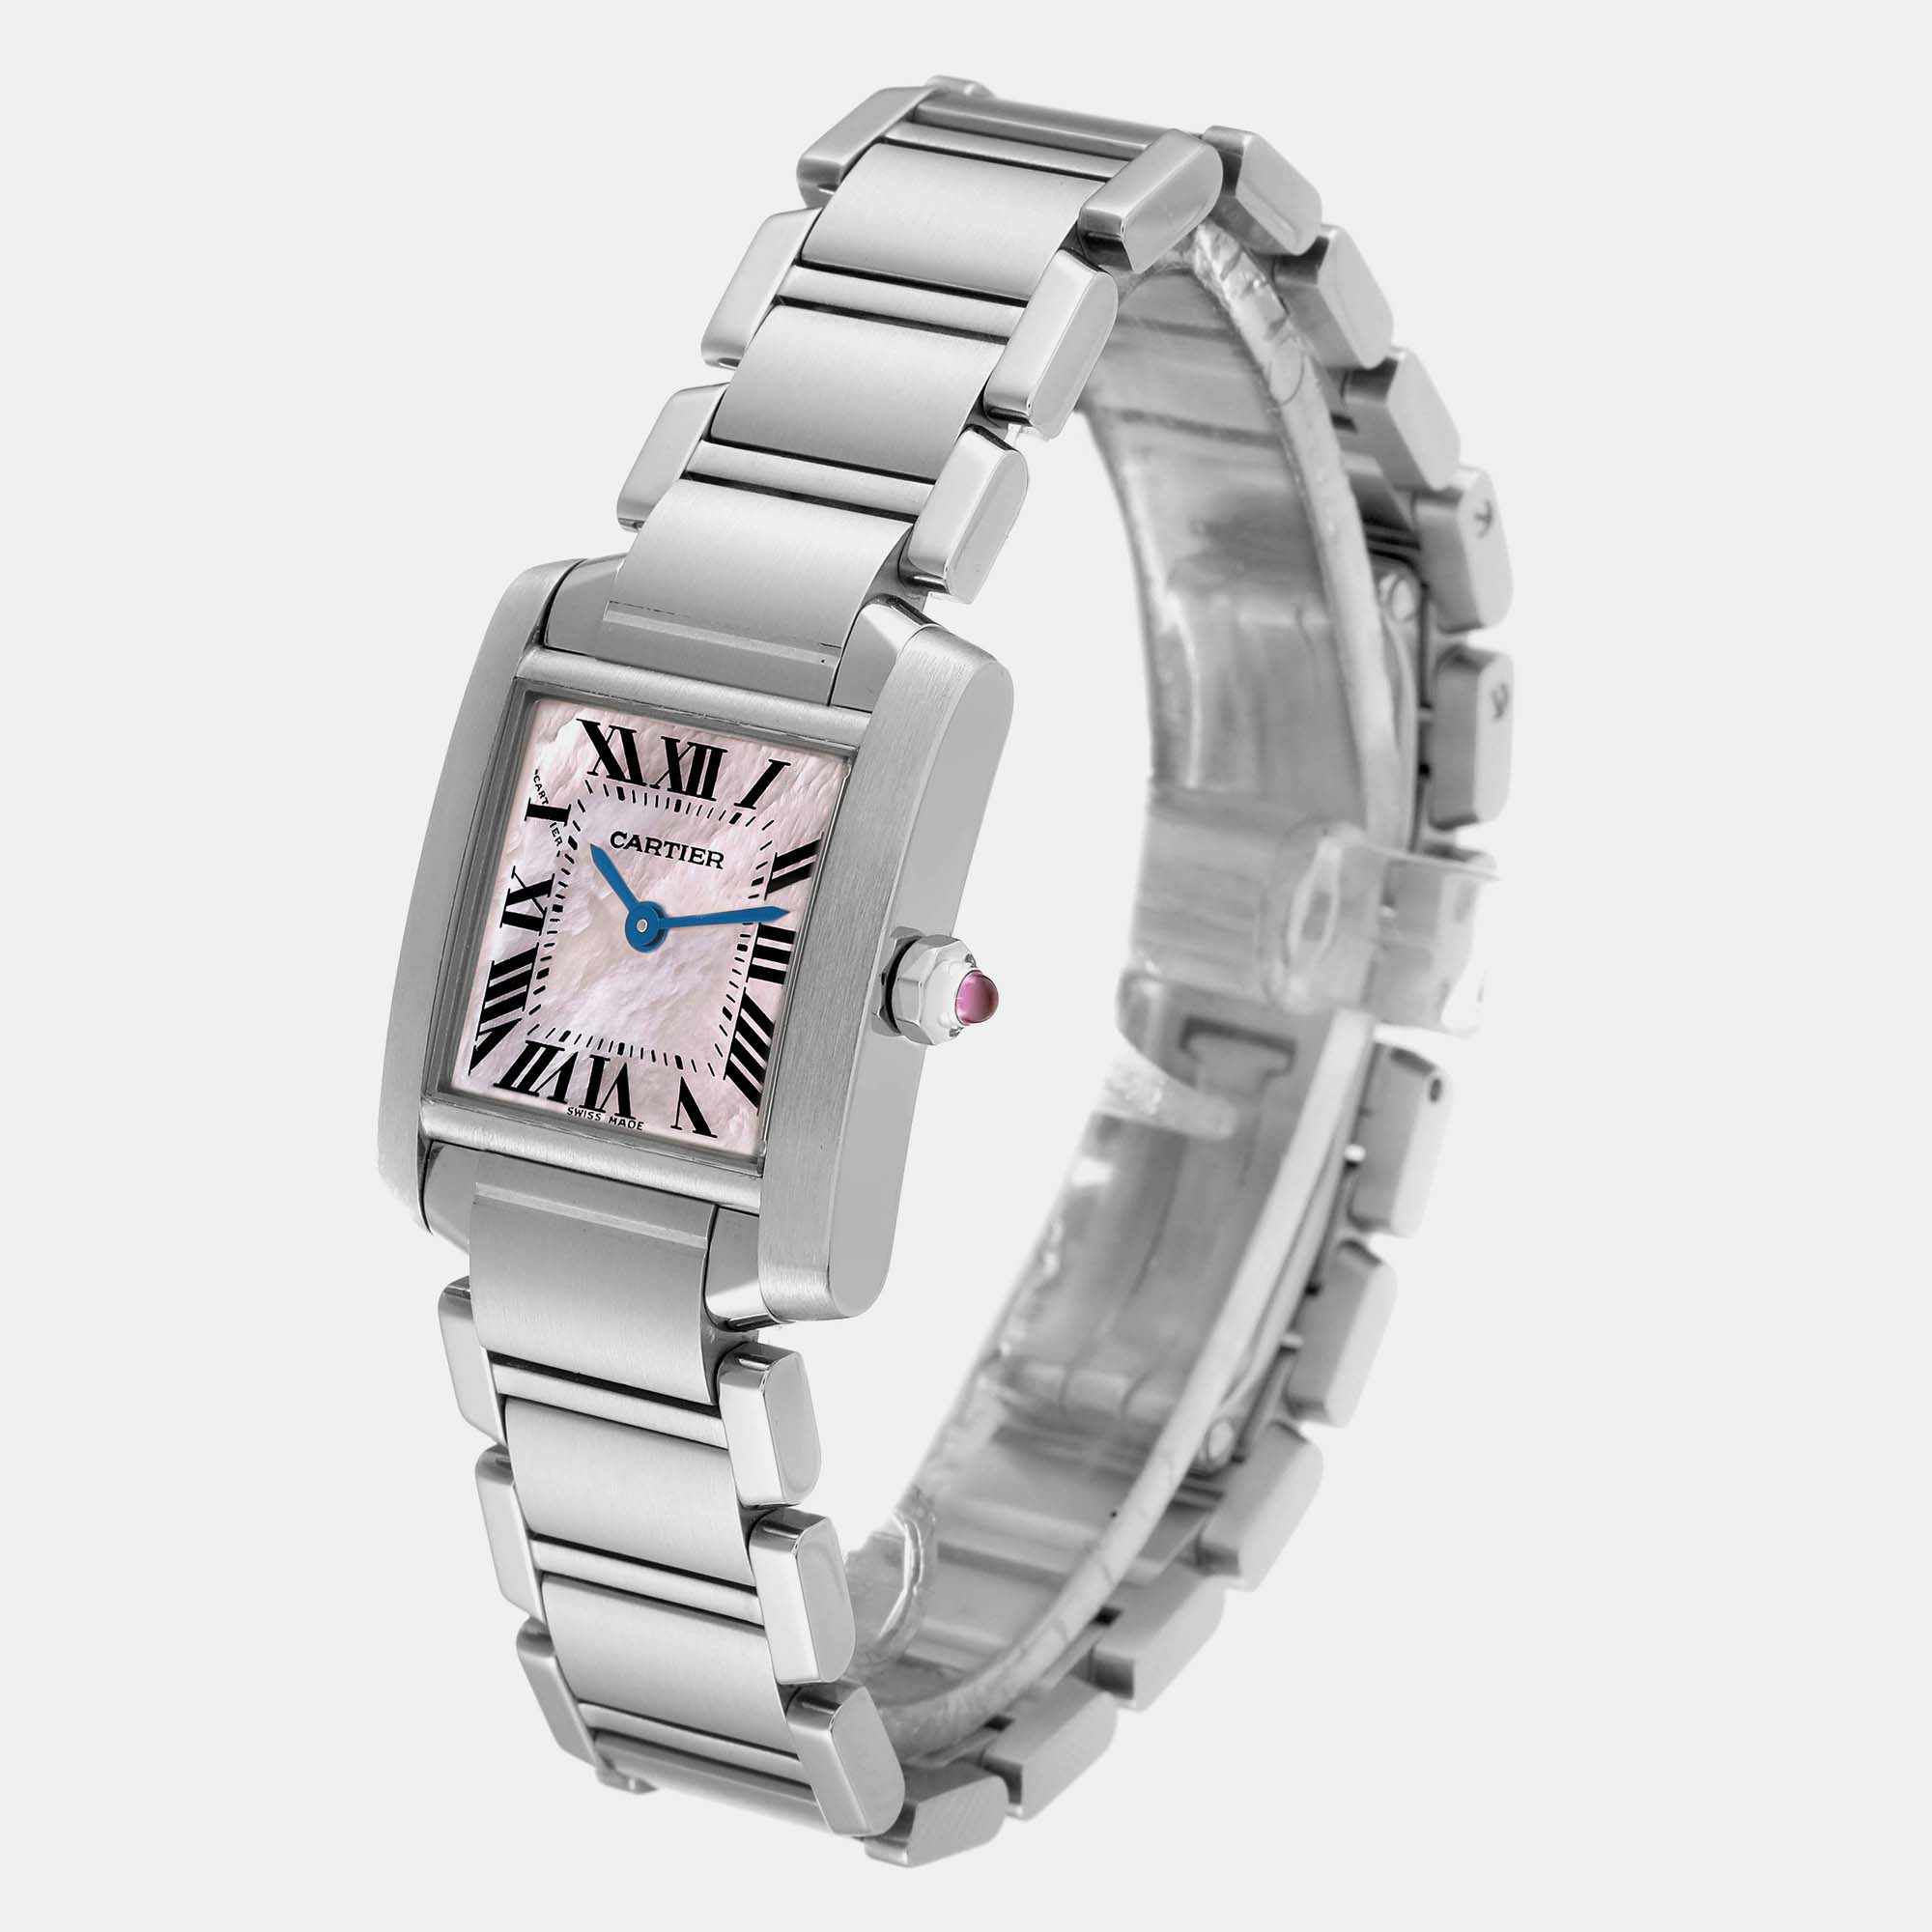 Cartier Tank Francaise Pink Mother Of Pearl Dial Steel Ladies Watch W51028Q3 20.0 Mm X 25.0 Mm